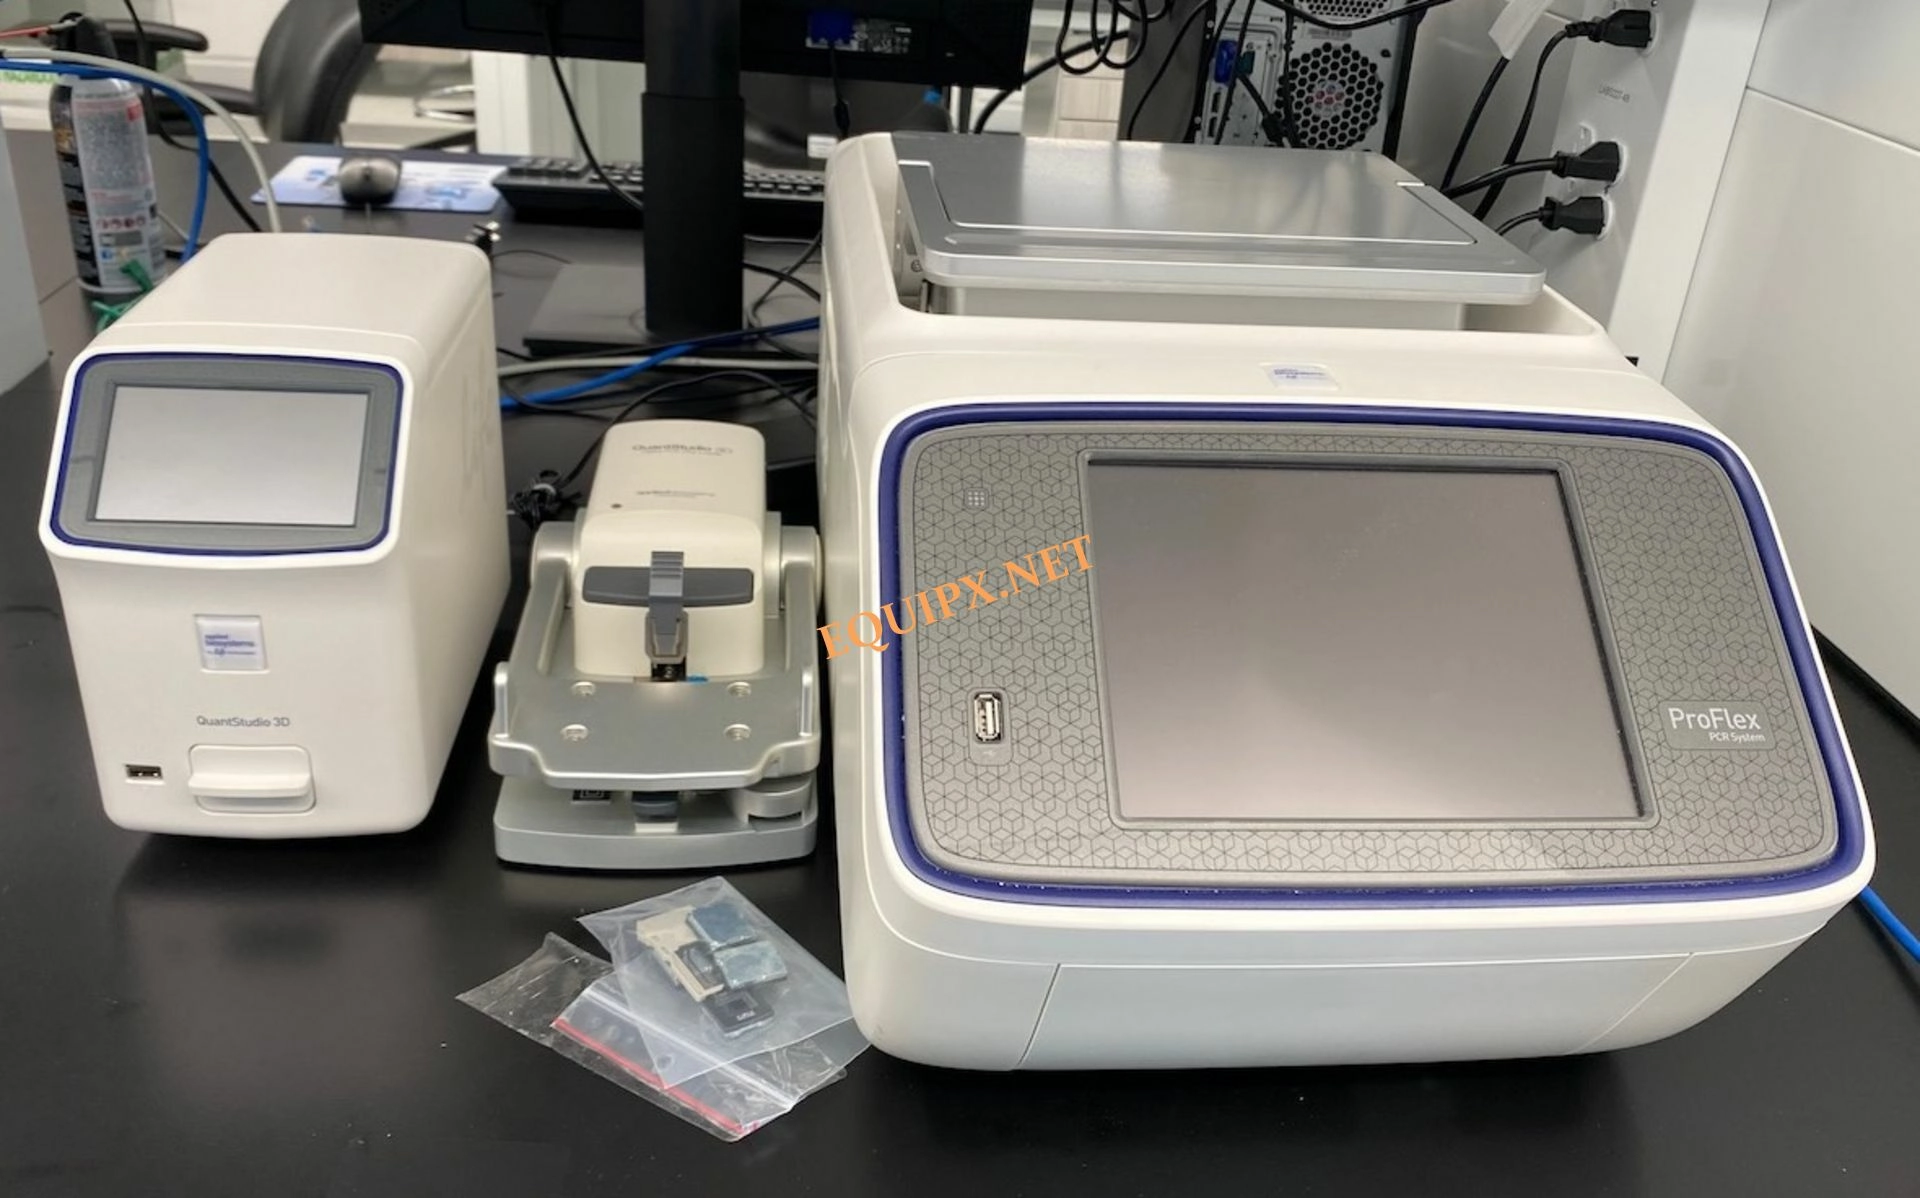 Applied Biosystems PCR Proflex with 3D Quant Studio and 3D digital PCR Chip Loader (4648)